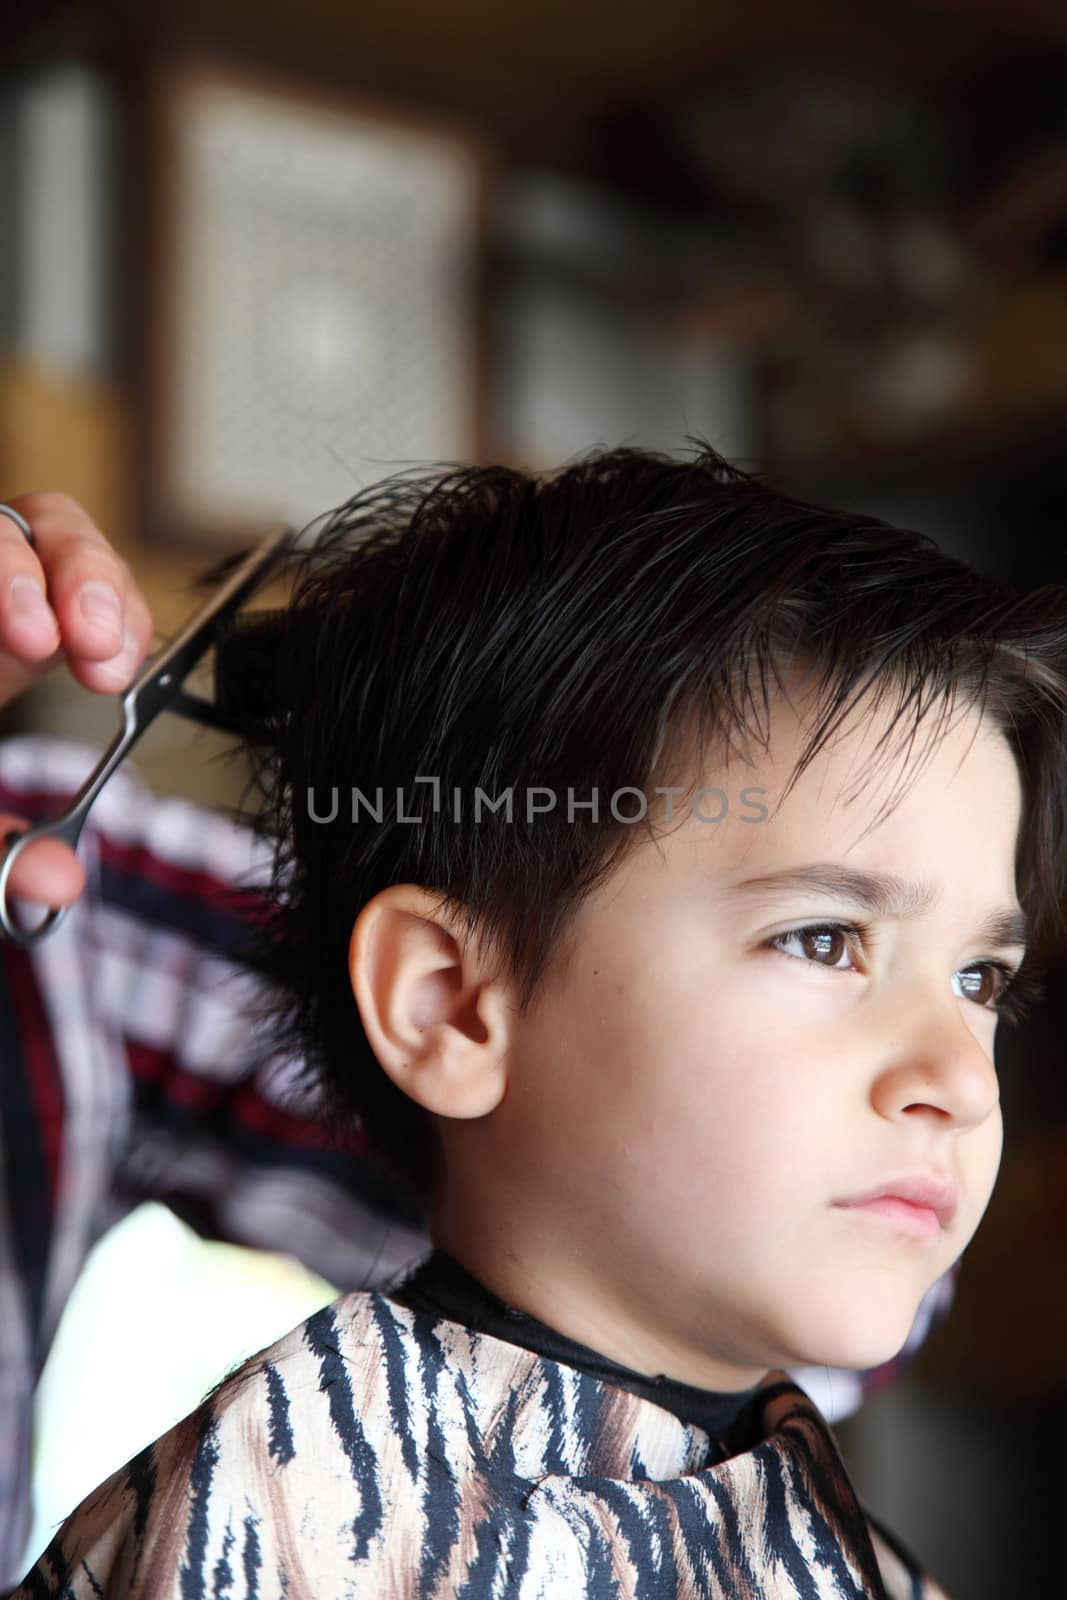 Young boy at barber shop by shamtor